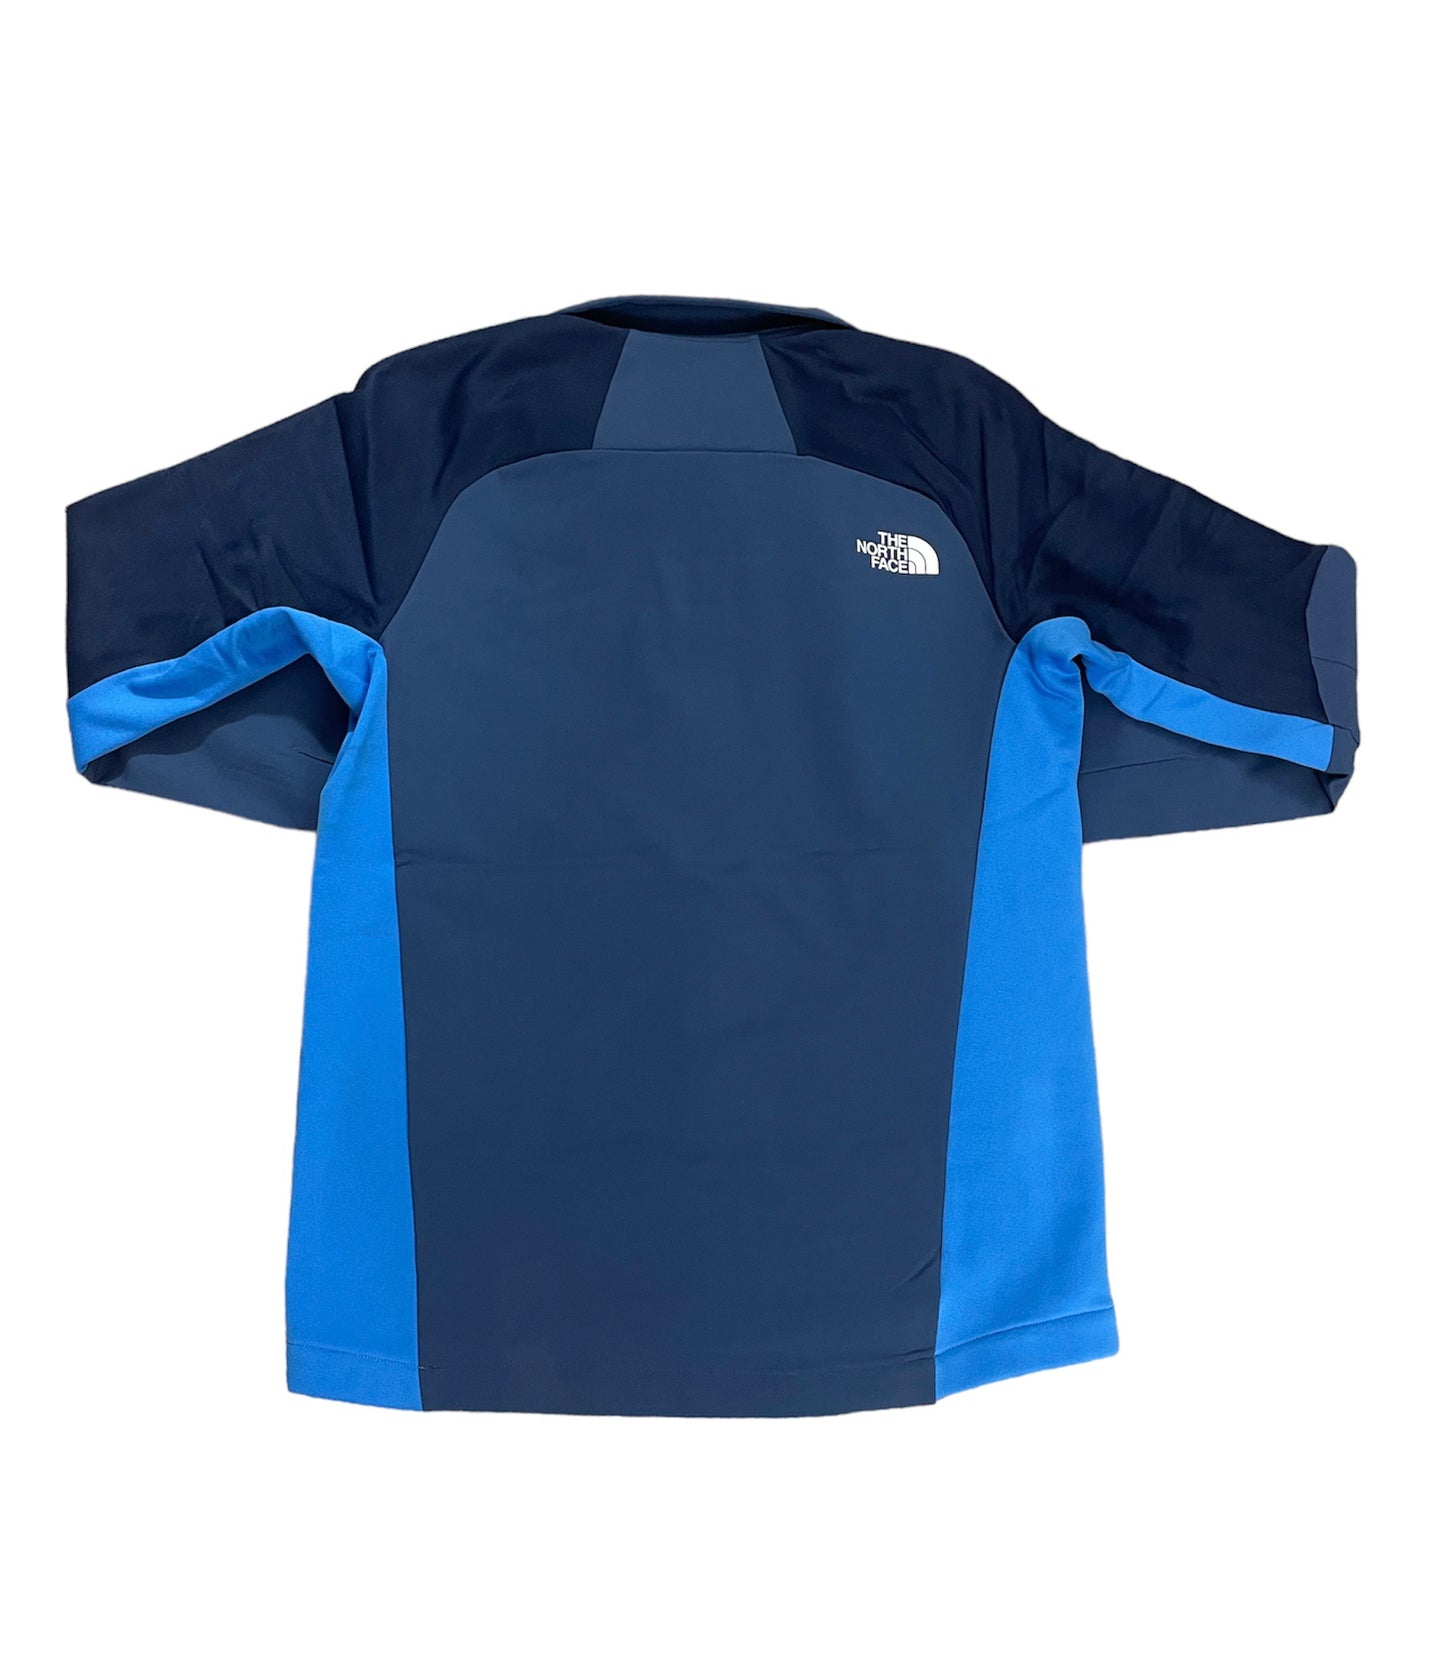 THE NORTH FACE HYBRID SOFT SHELL FULL ZIP JACKET - BLUE